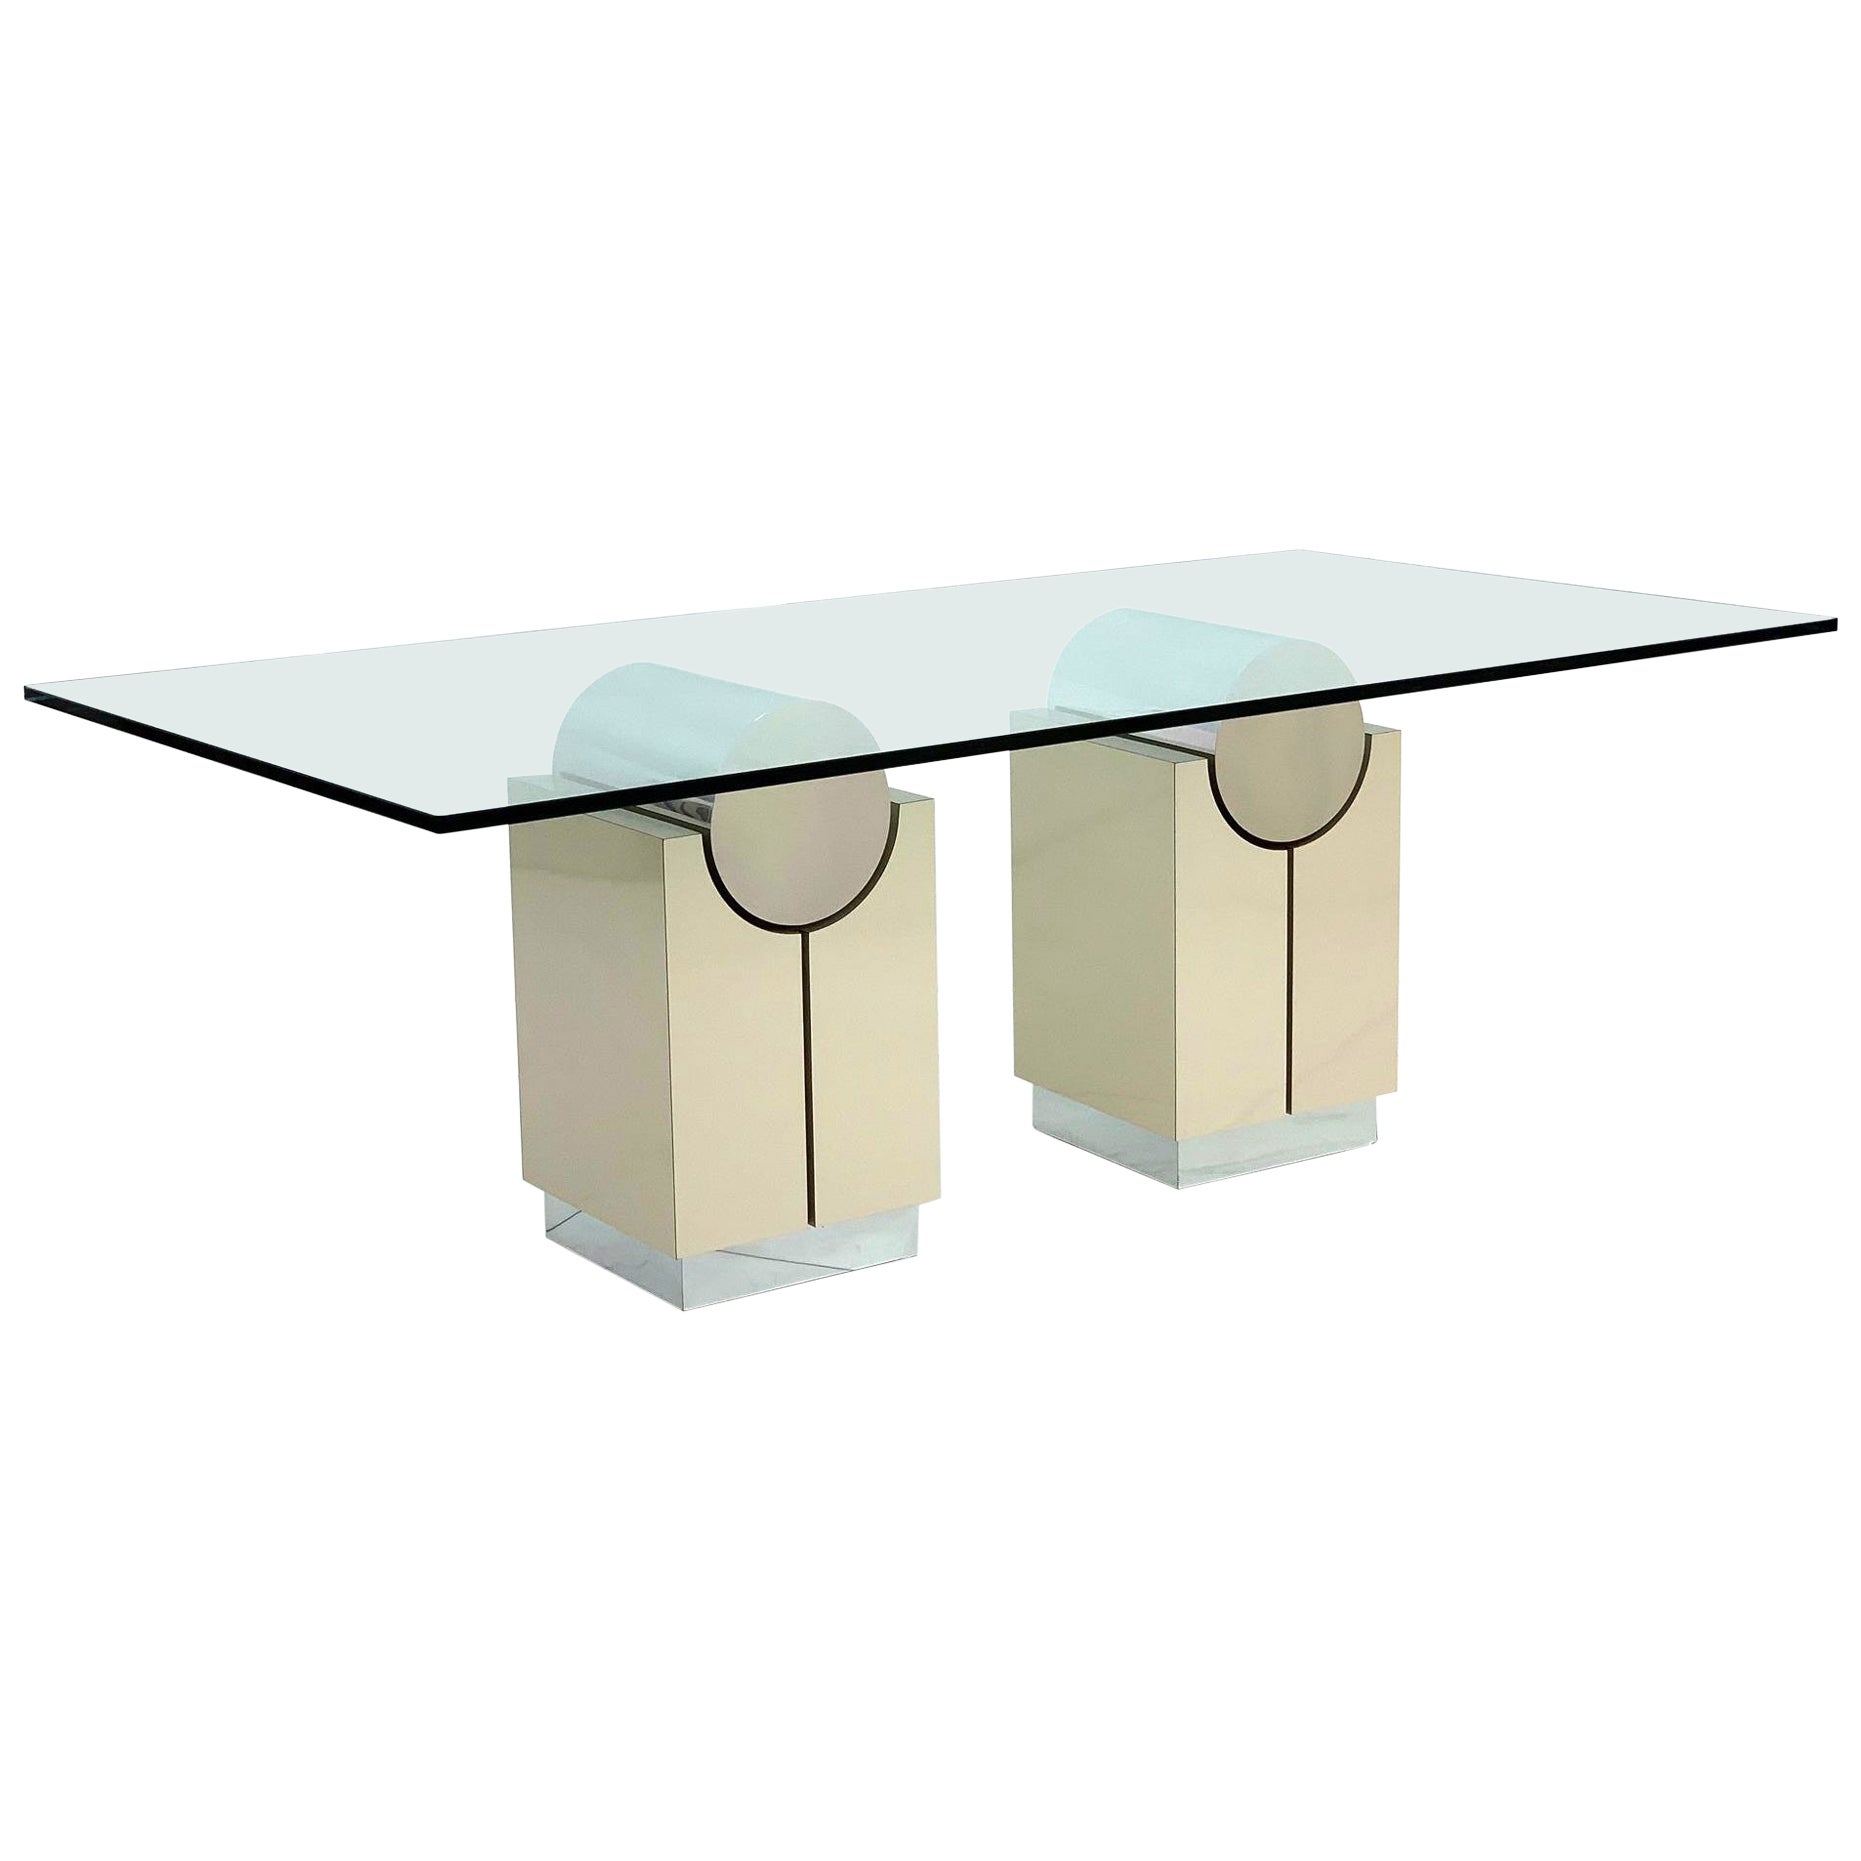 Post Modern Chrome and Lacquer Double Pedestal Dining Table or Writing Table